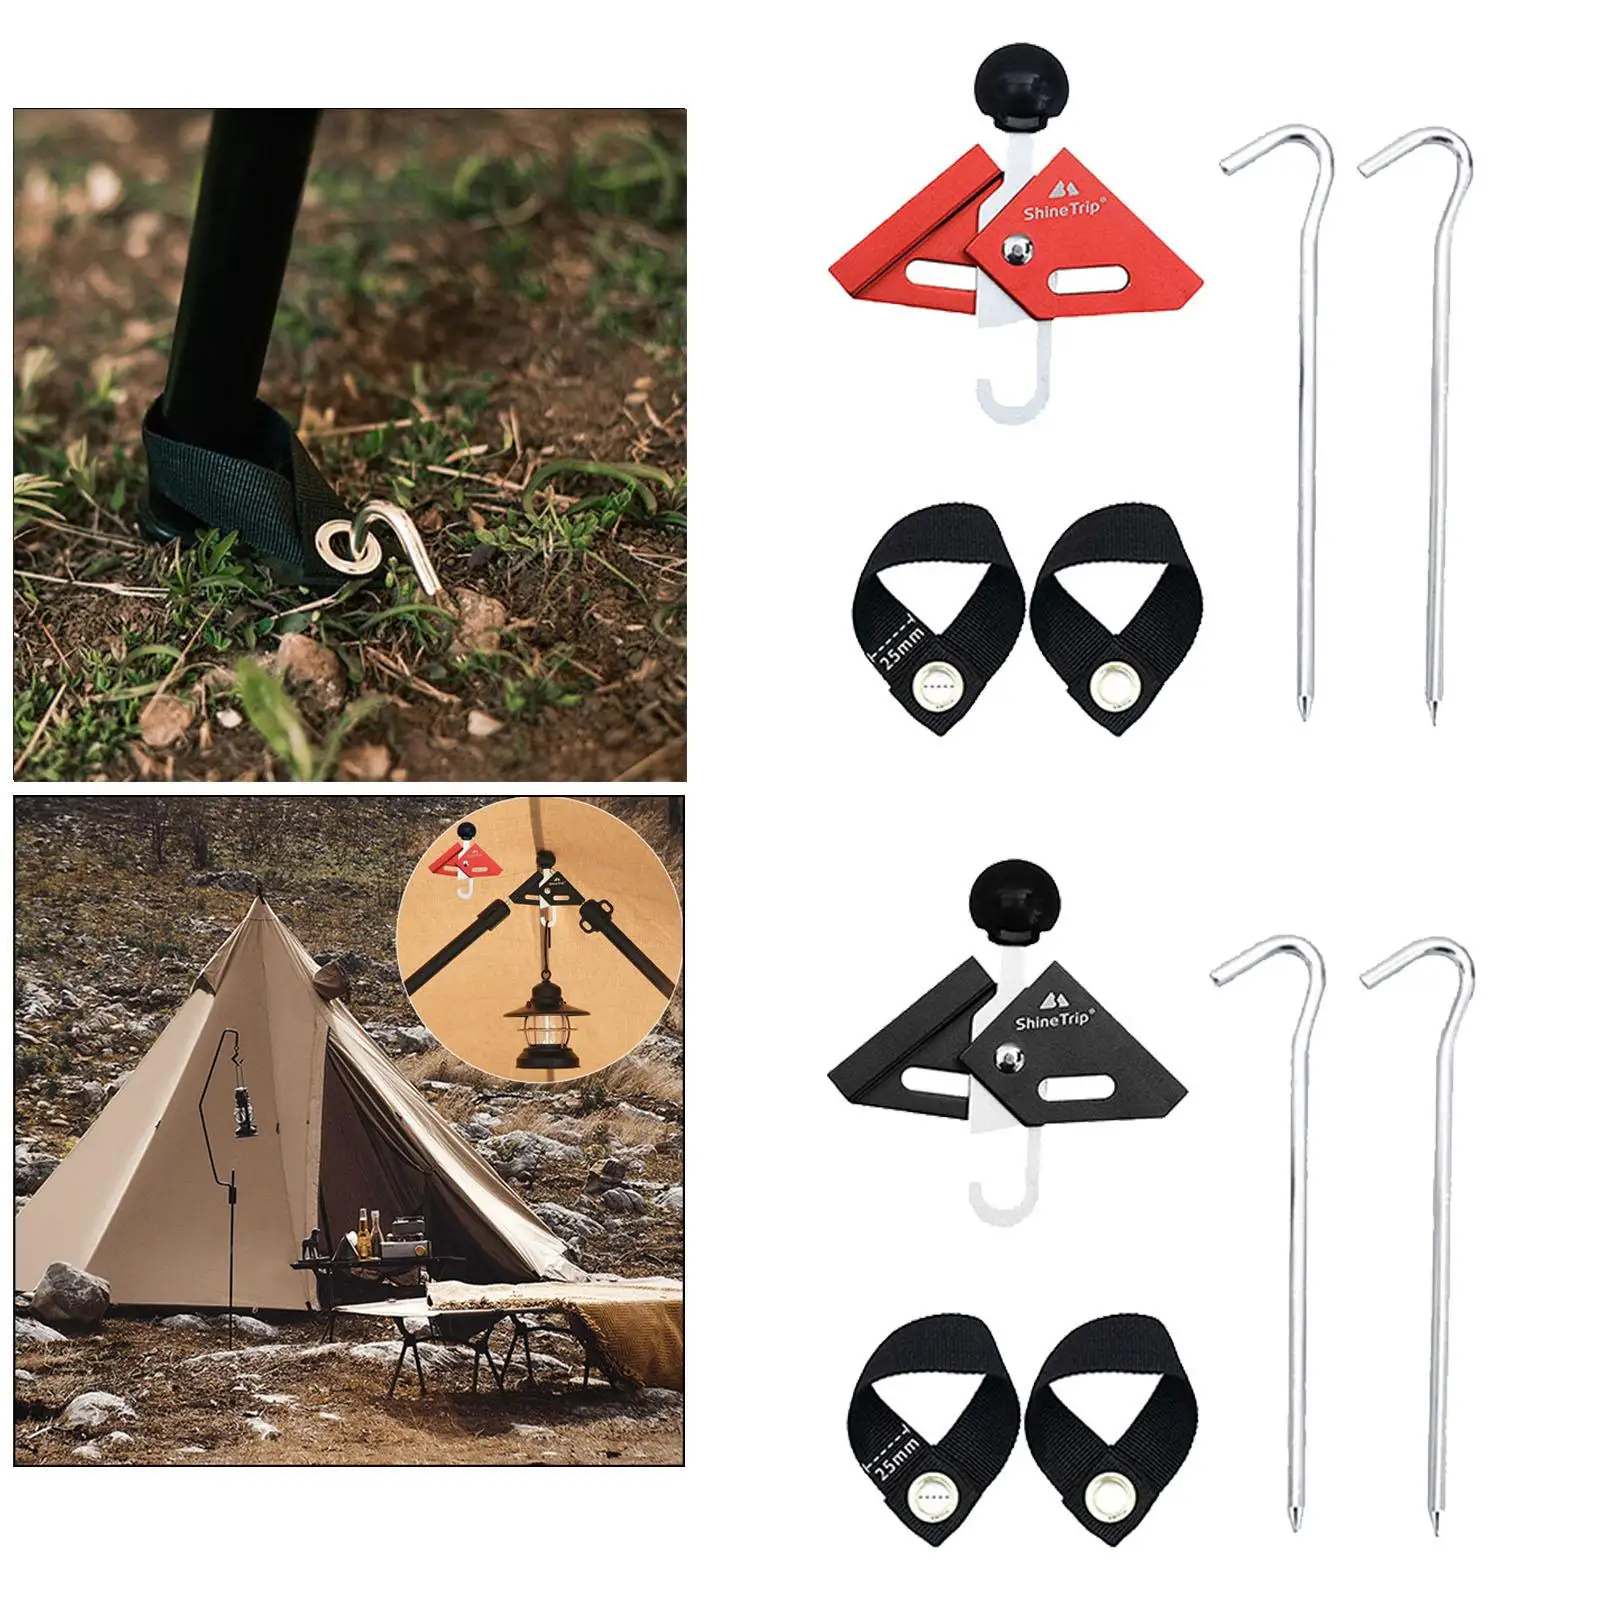 Aluminum Alloy 90 Degree Tarp Post Tip Plugs Puncture Proof Ball Tent Construction Pole Connector with Strap